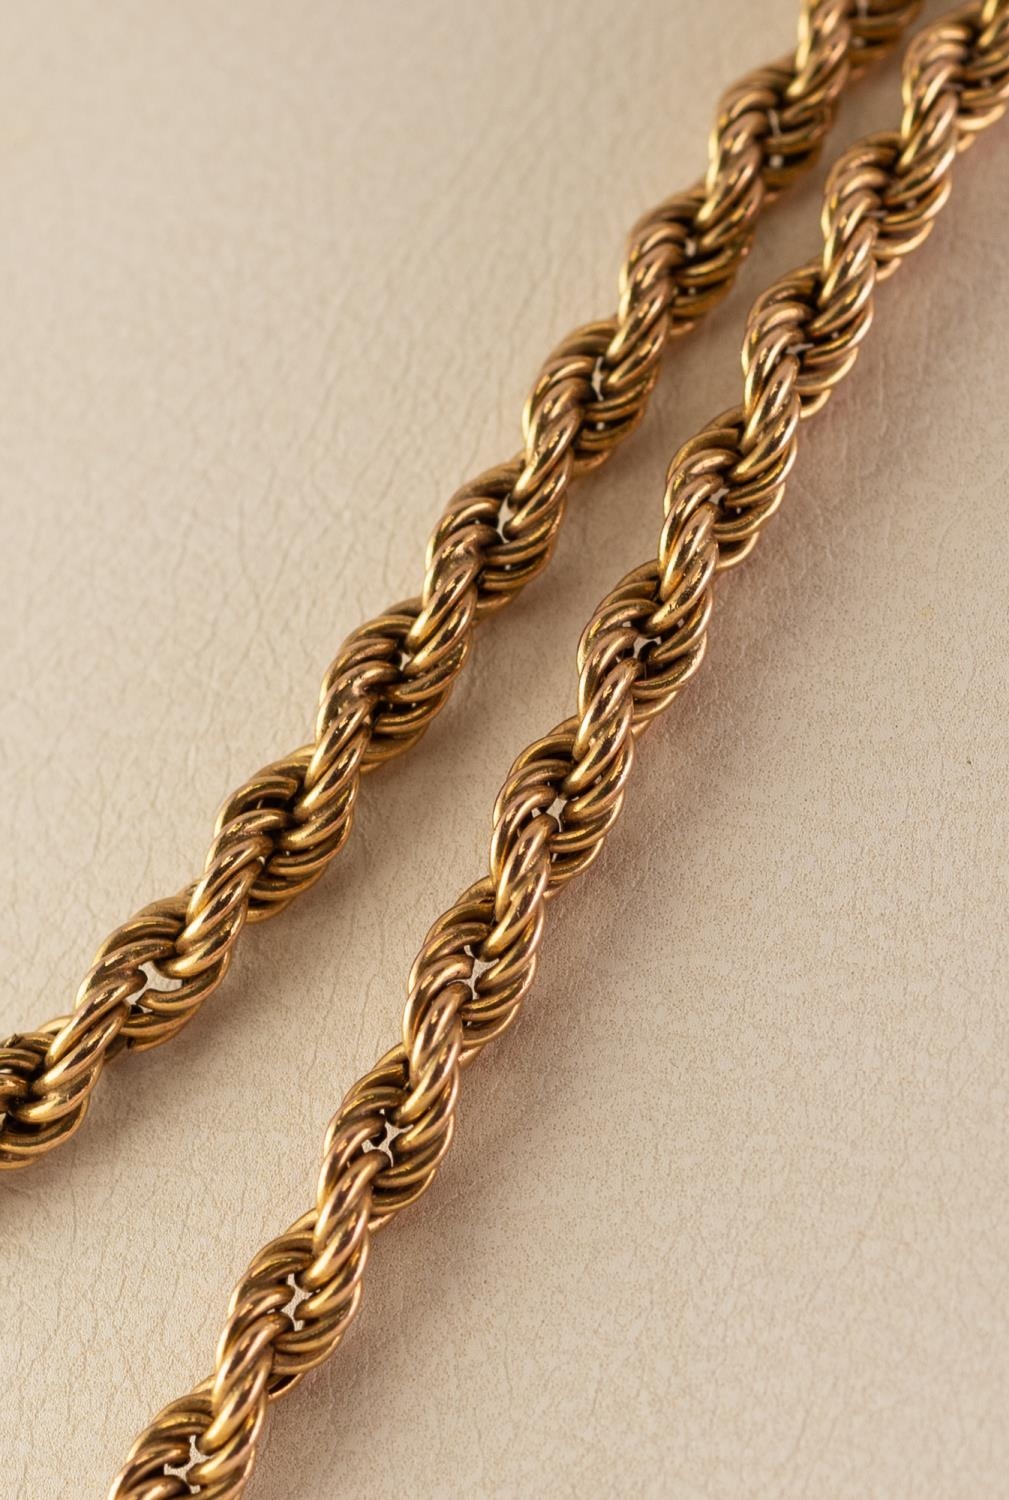 9ct GOLD BRAIDED CHAIN NECKLACE 21.7 gms - Image 2 of 3